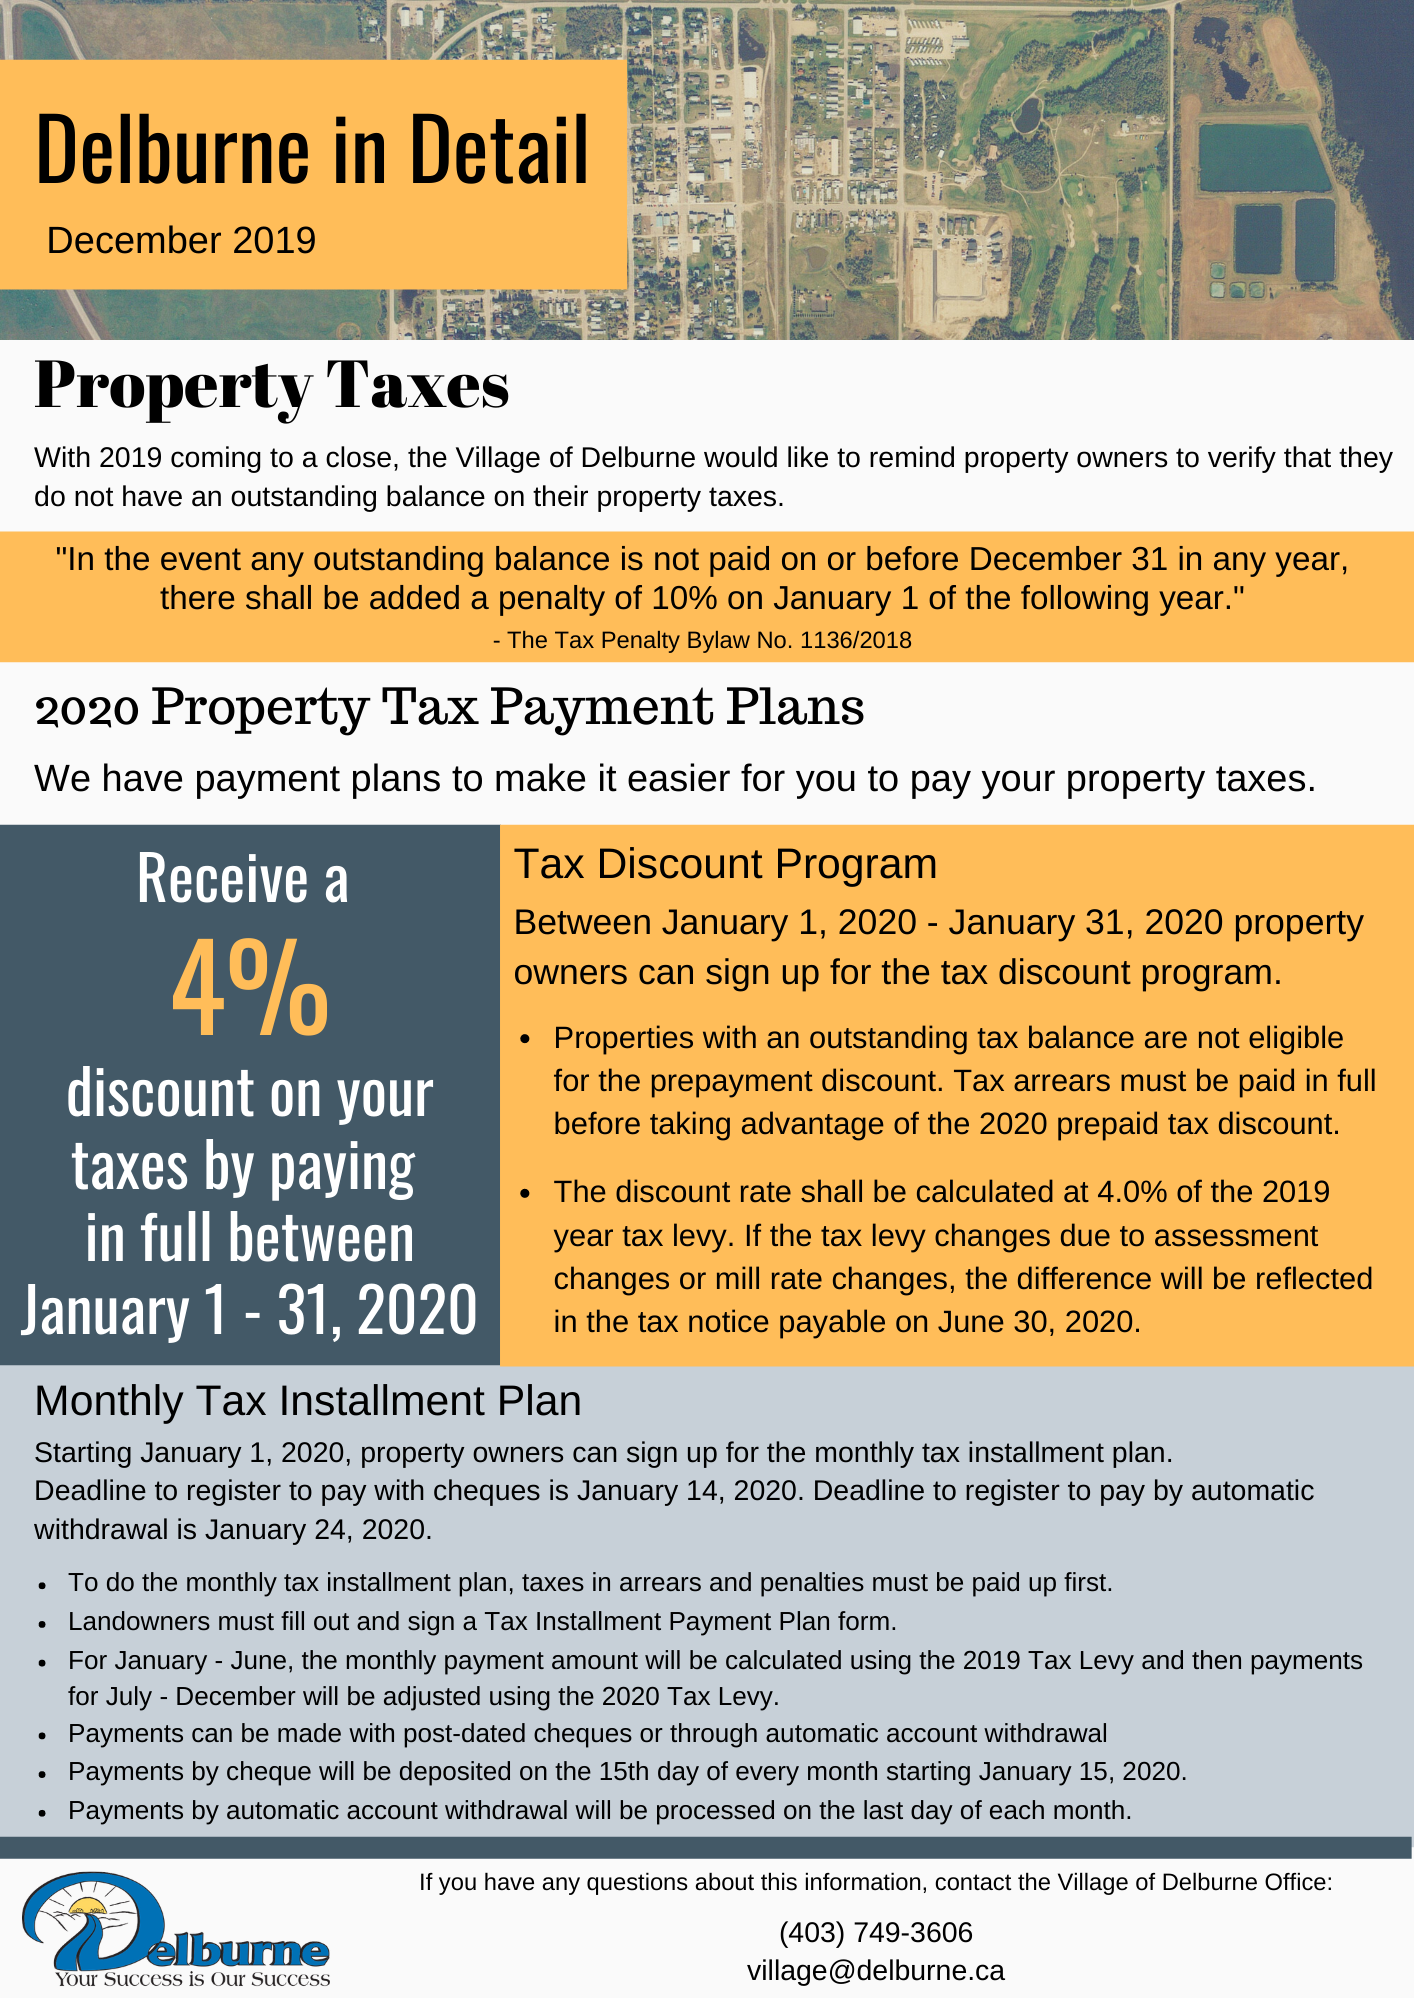 Delburne in Detail - December 2019 - Property Taxes.png